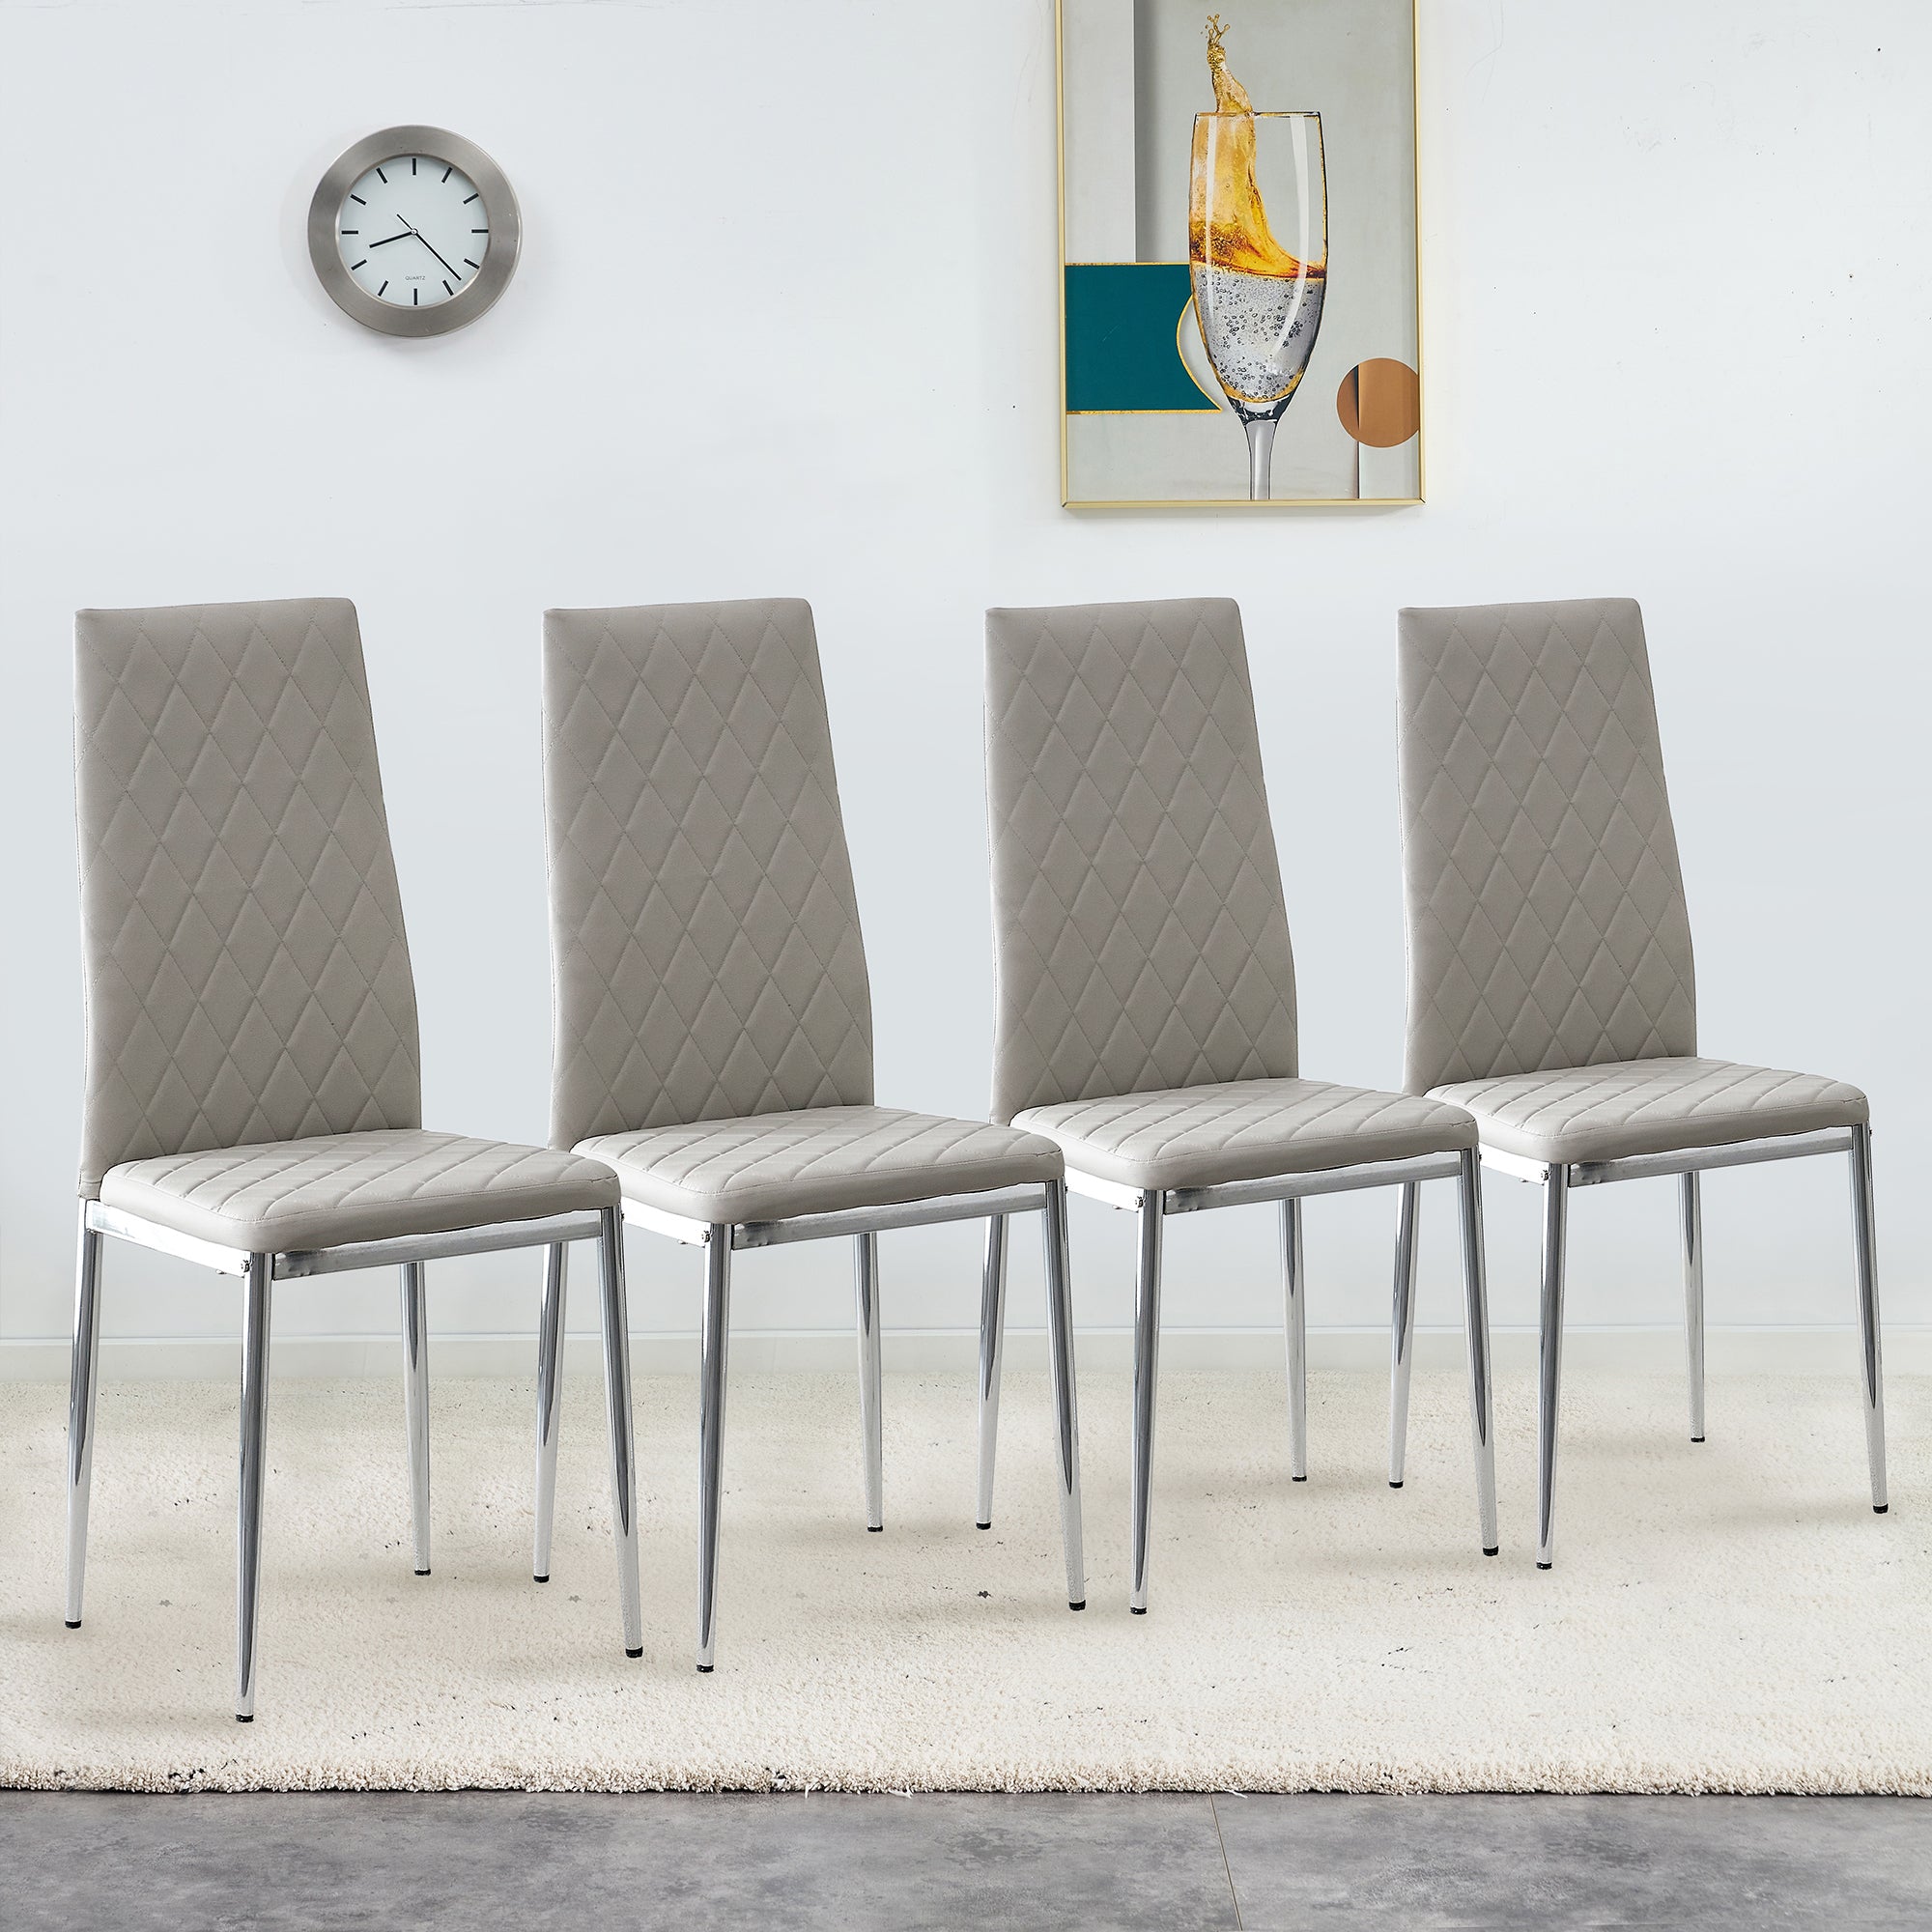 Set of 4Pc Modern Light Gray Faux Leather Dining chairs with Chromed Legs